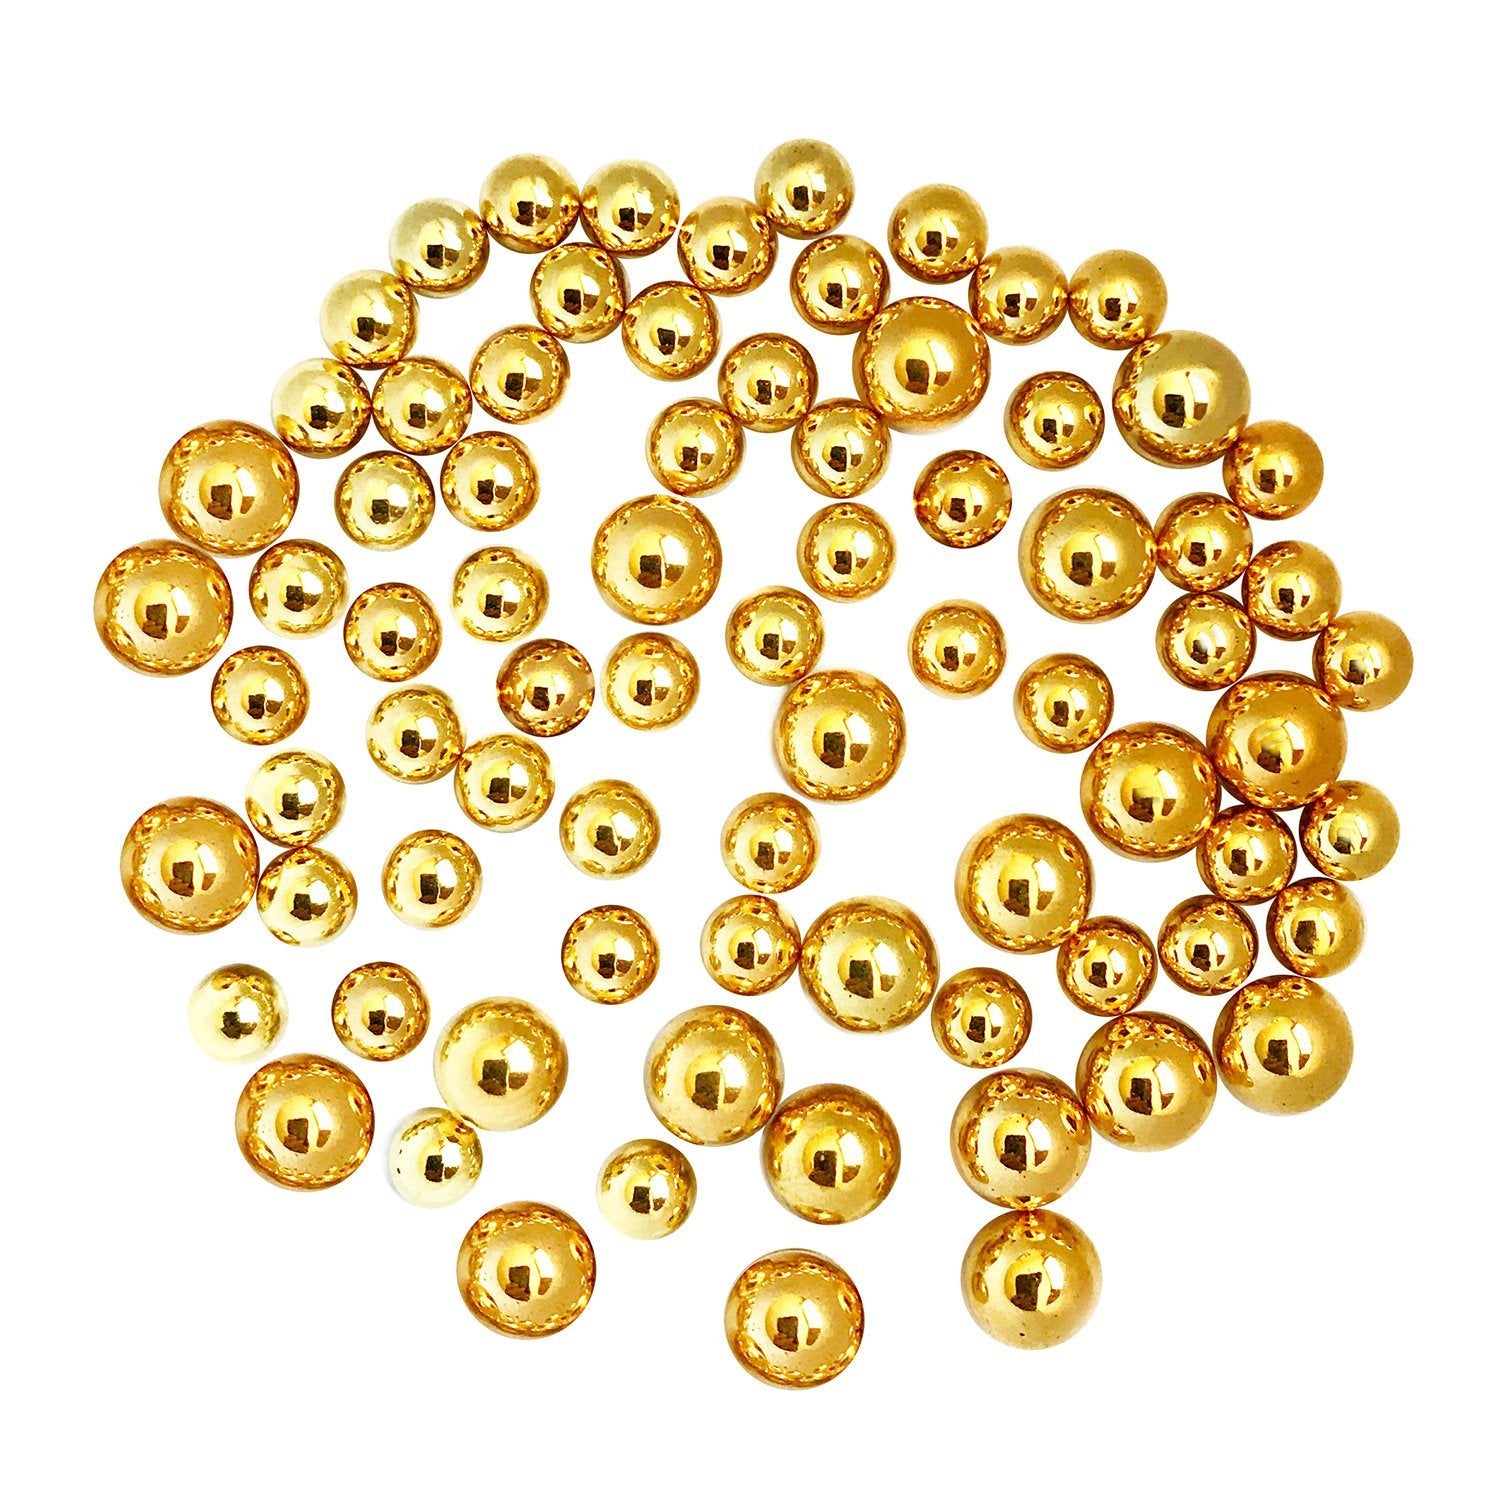 Golden - PZ107 - Buttons Galore and More